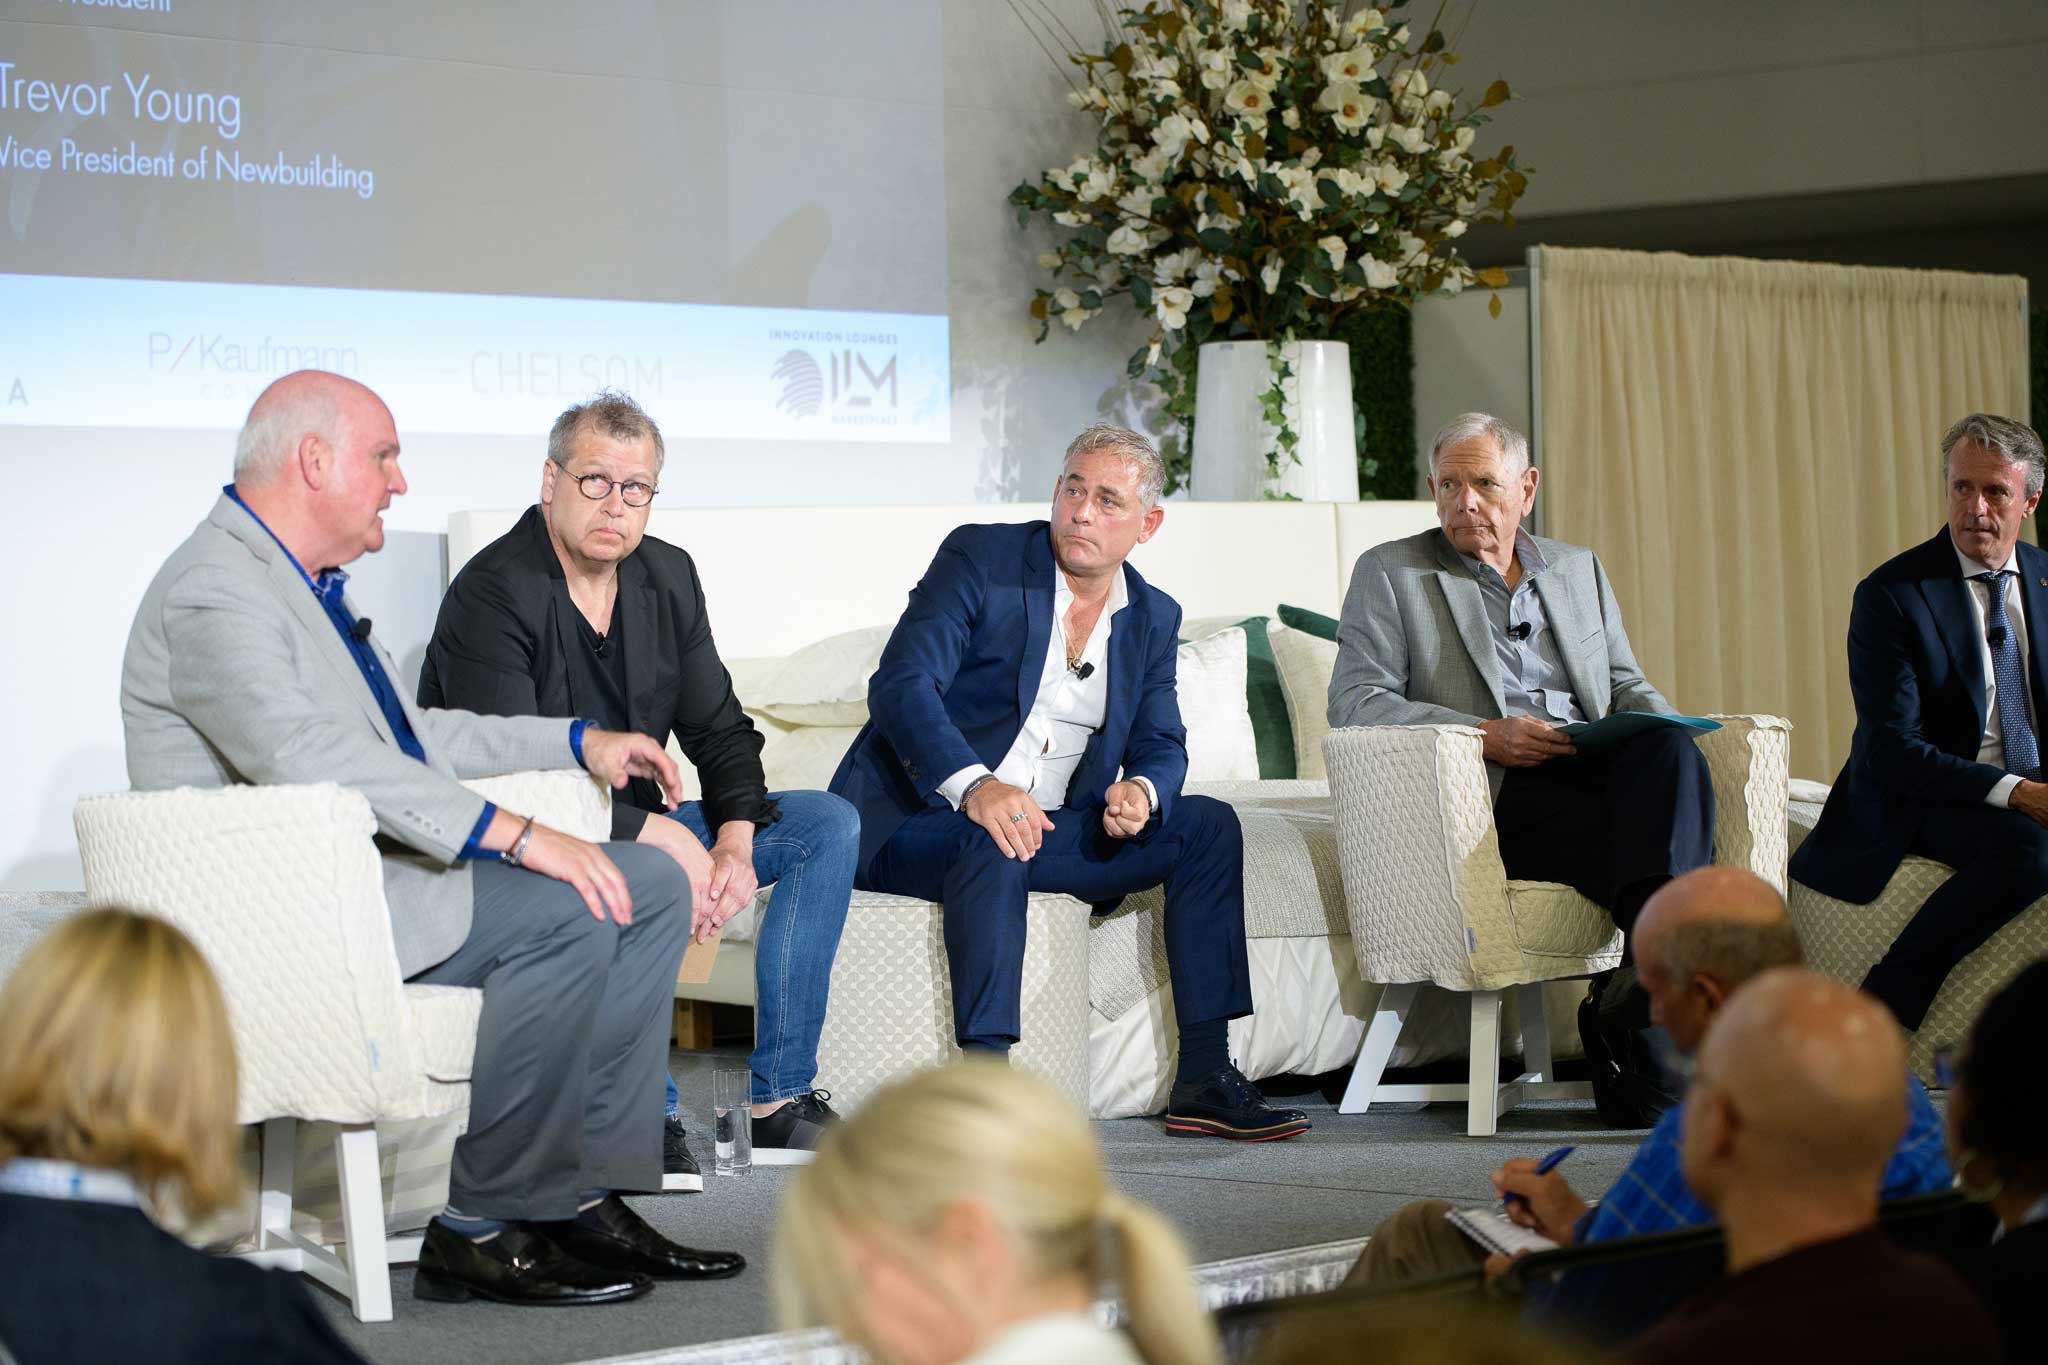 the leaders debate keynote at cruise conversations live conference 2022